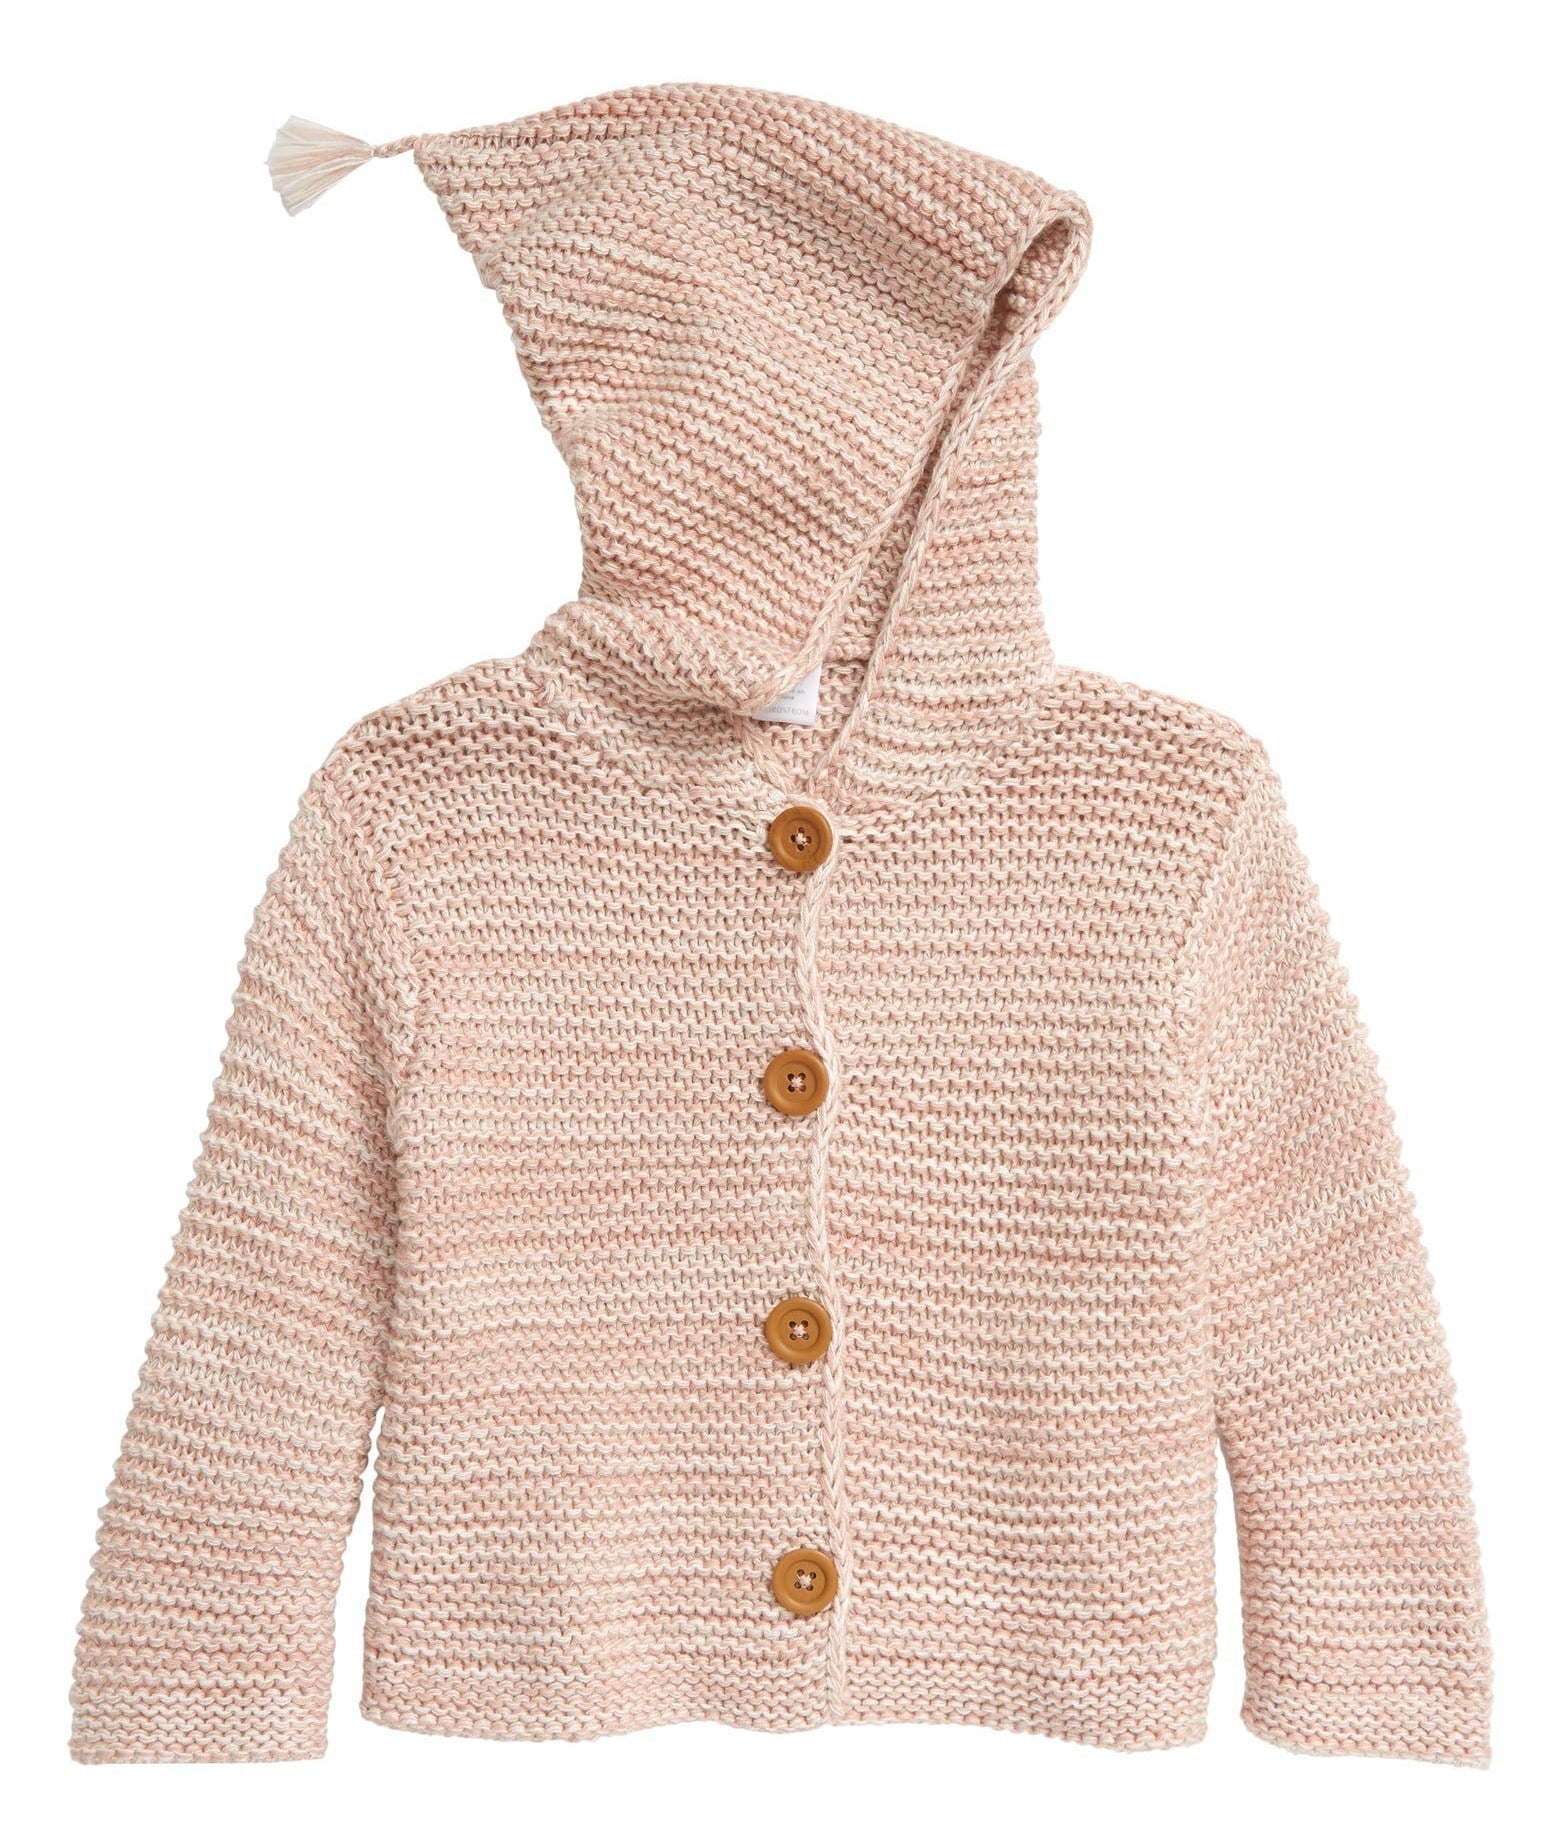 The pink hooded baby cardigan